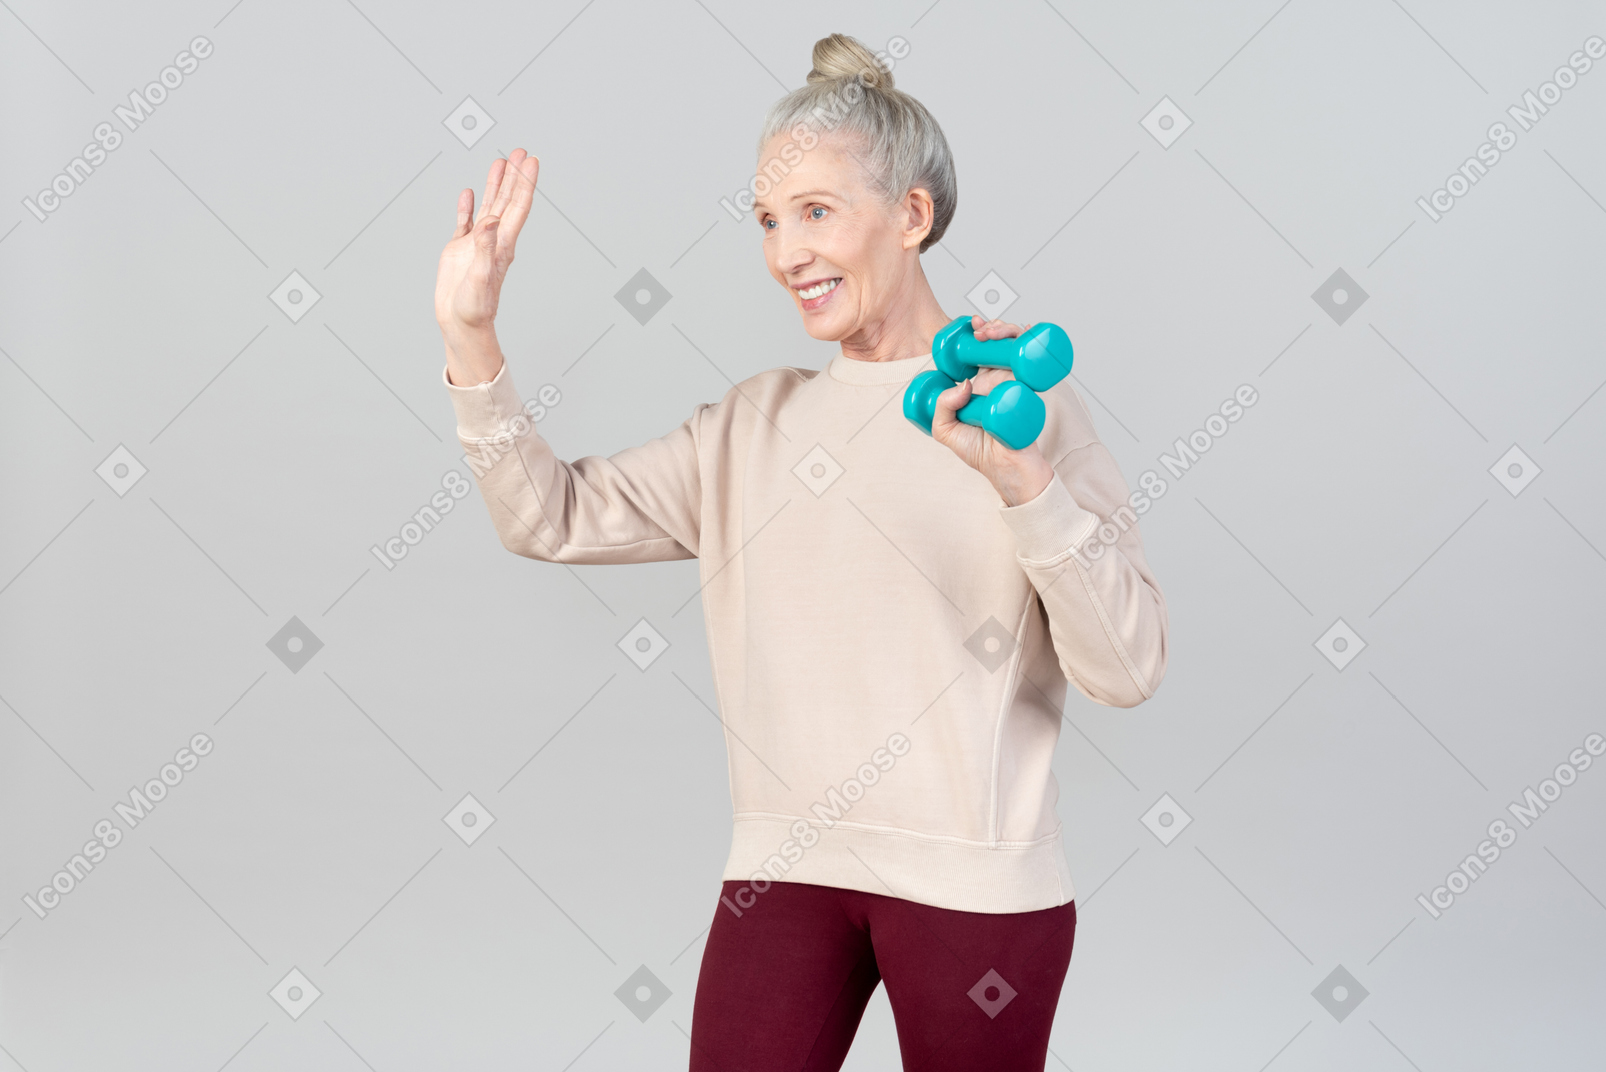 Smiling old woman holding hand weights in one hand